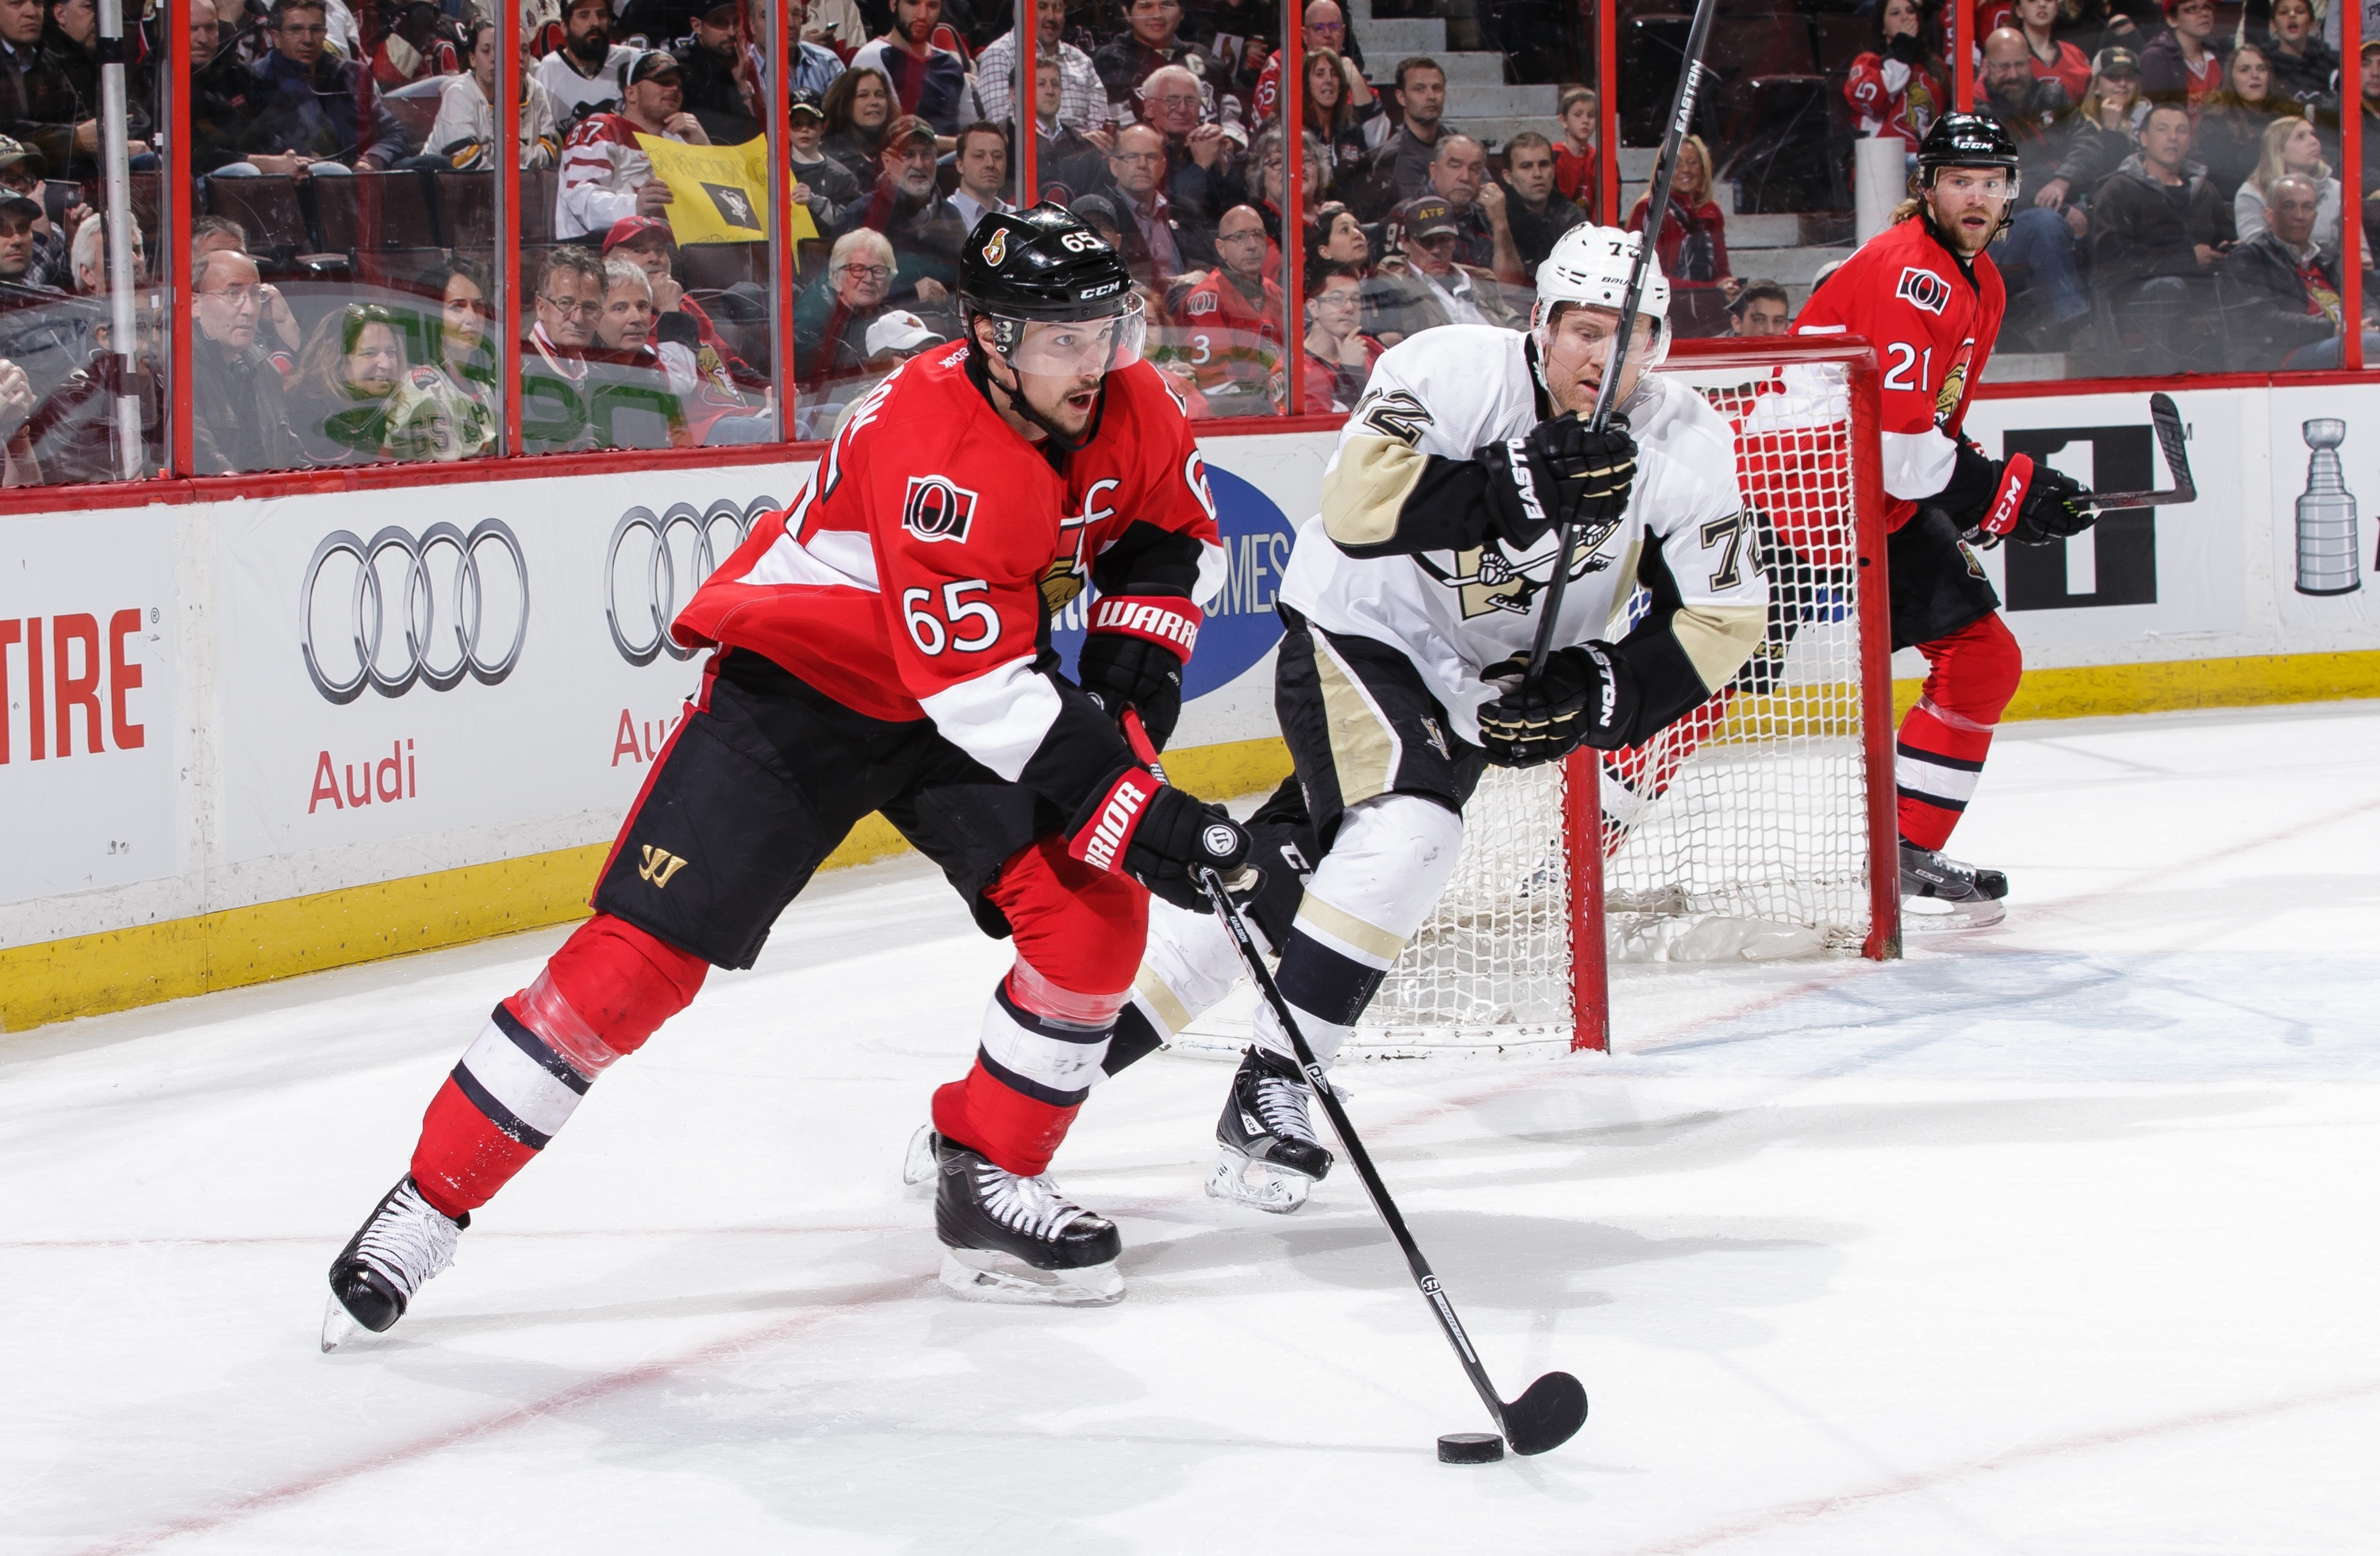 OTTAWA, ON - APRIL 5: Erik Karlsson #65 of the Ottawa Senators carries the puck out of his end while being chased by Patric Hornqvist #72 of the Pittsburgh Penguins at Canadian Tire Centre on April 5, 2016 in Ottawa, Ontario, Canada.  (Photo by Jana Chytilova/Freestyle Photography/Getty Images)